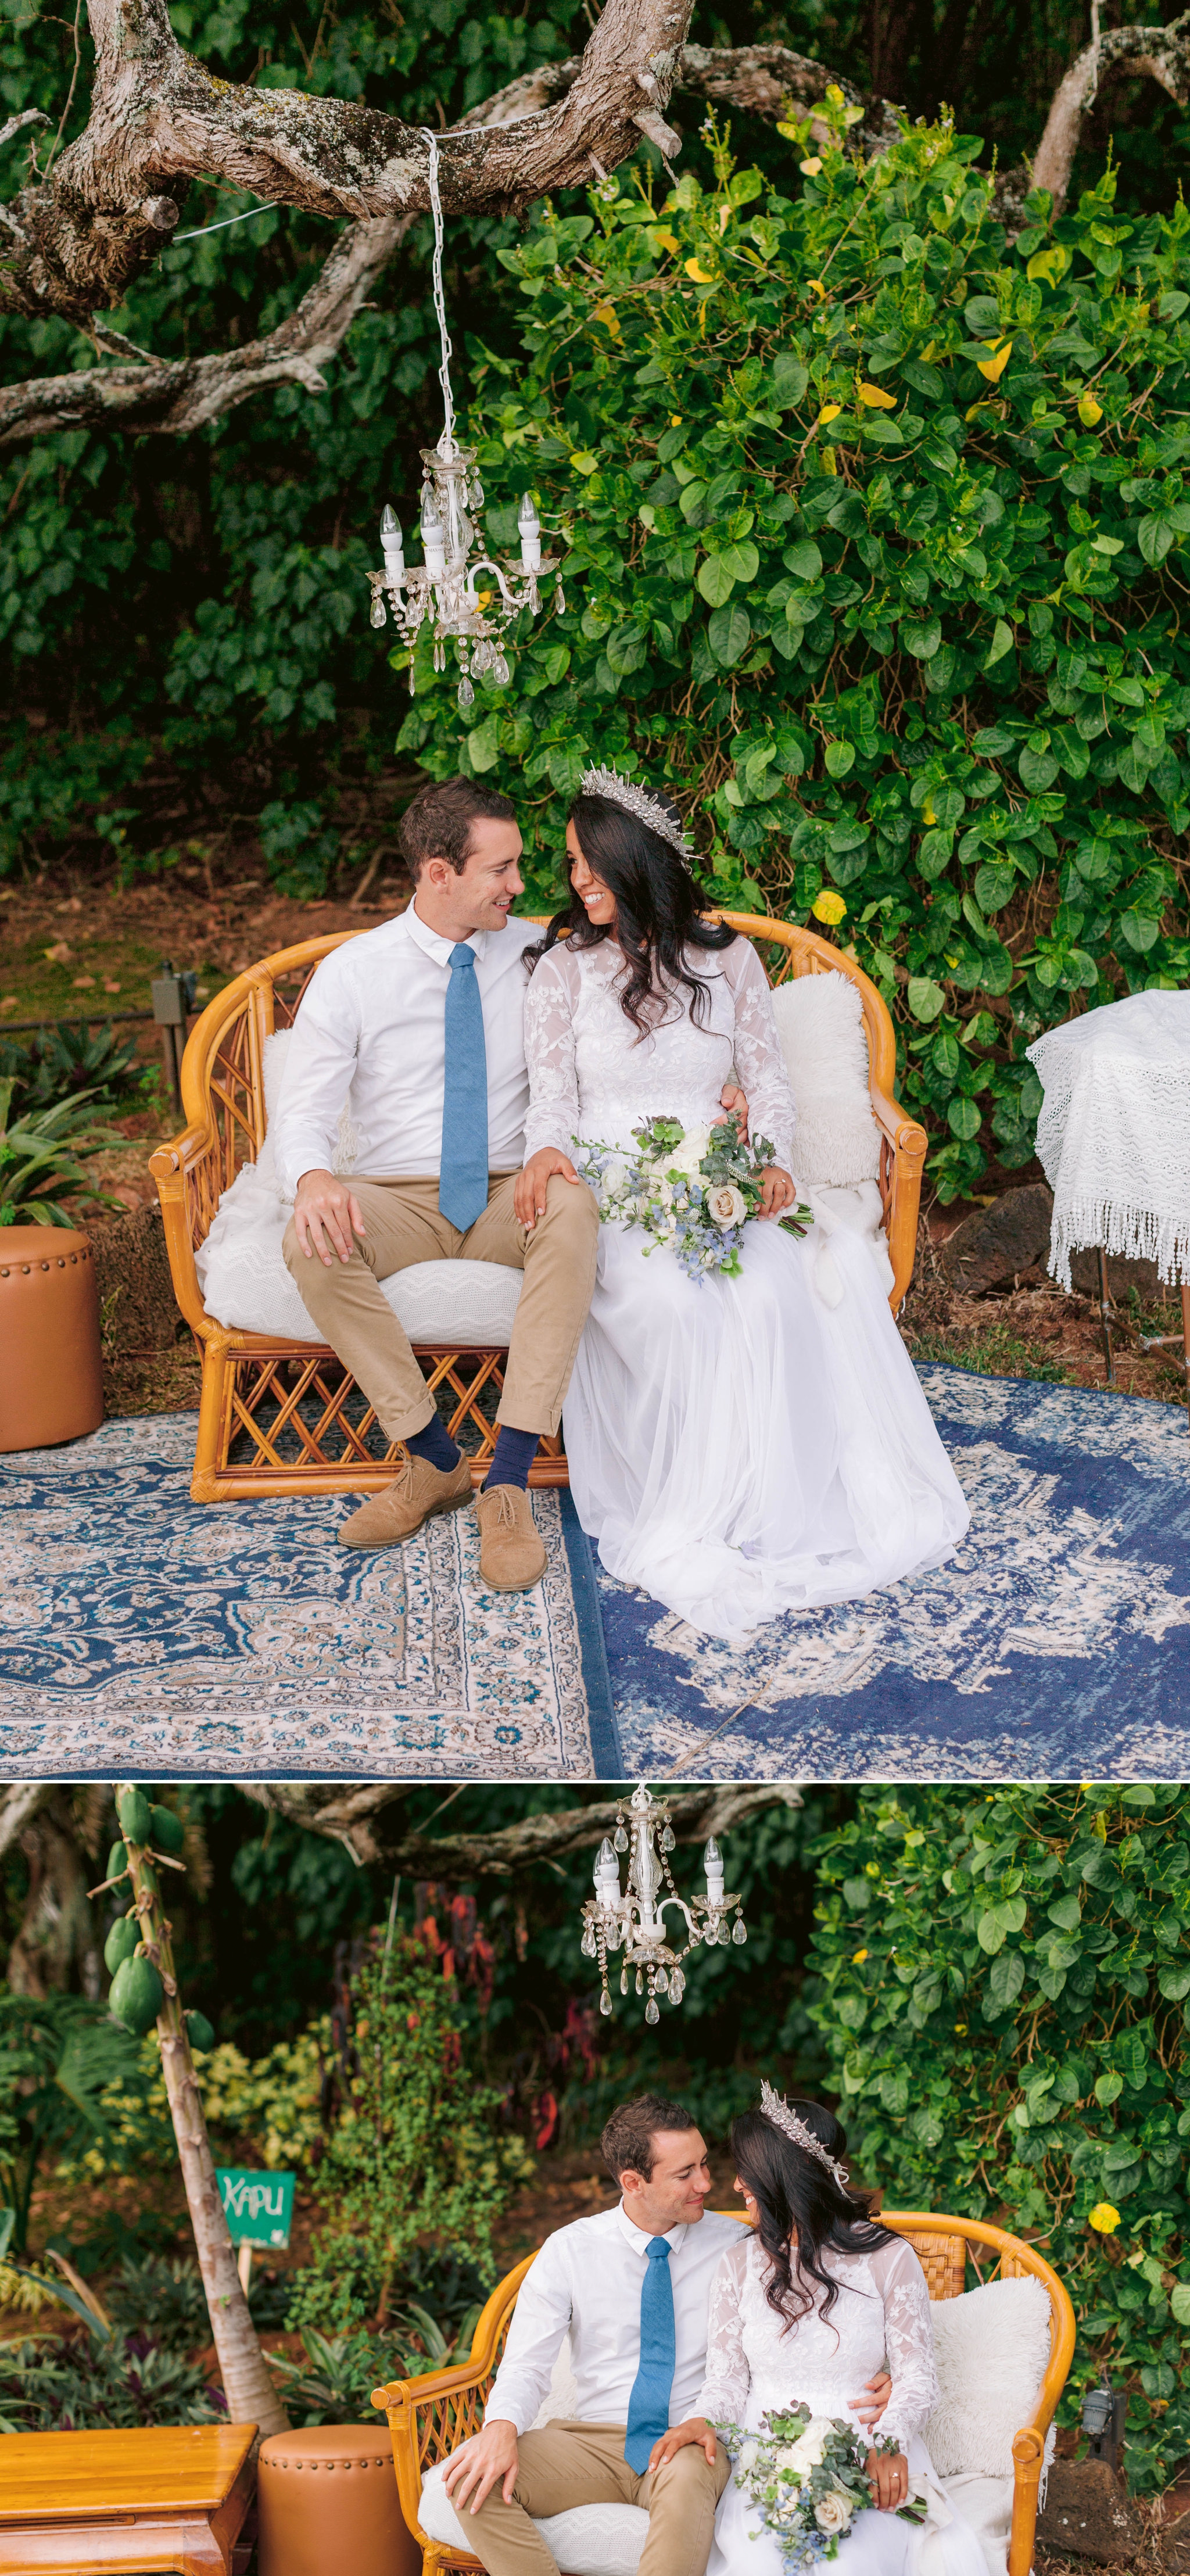  Bride and Groom relaxing in a tropical outdoor lounge with blue rugs, rattan furniture and a crystal chandelier - Ana + Elijah - Wedding at Loulu Palm in Haleiwa, HI - Oahu Hawaii Wedding Photographer 